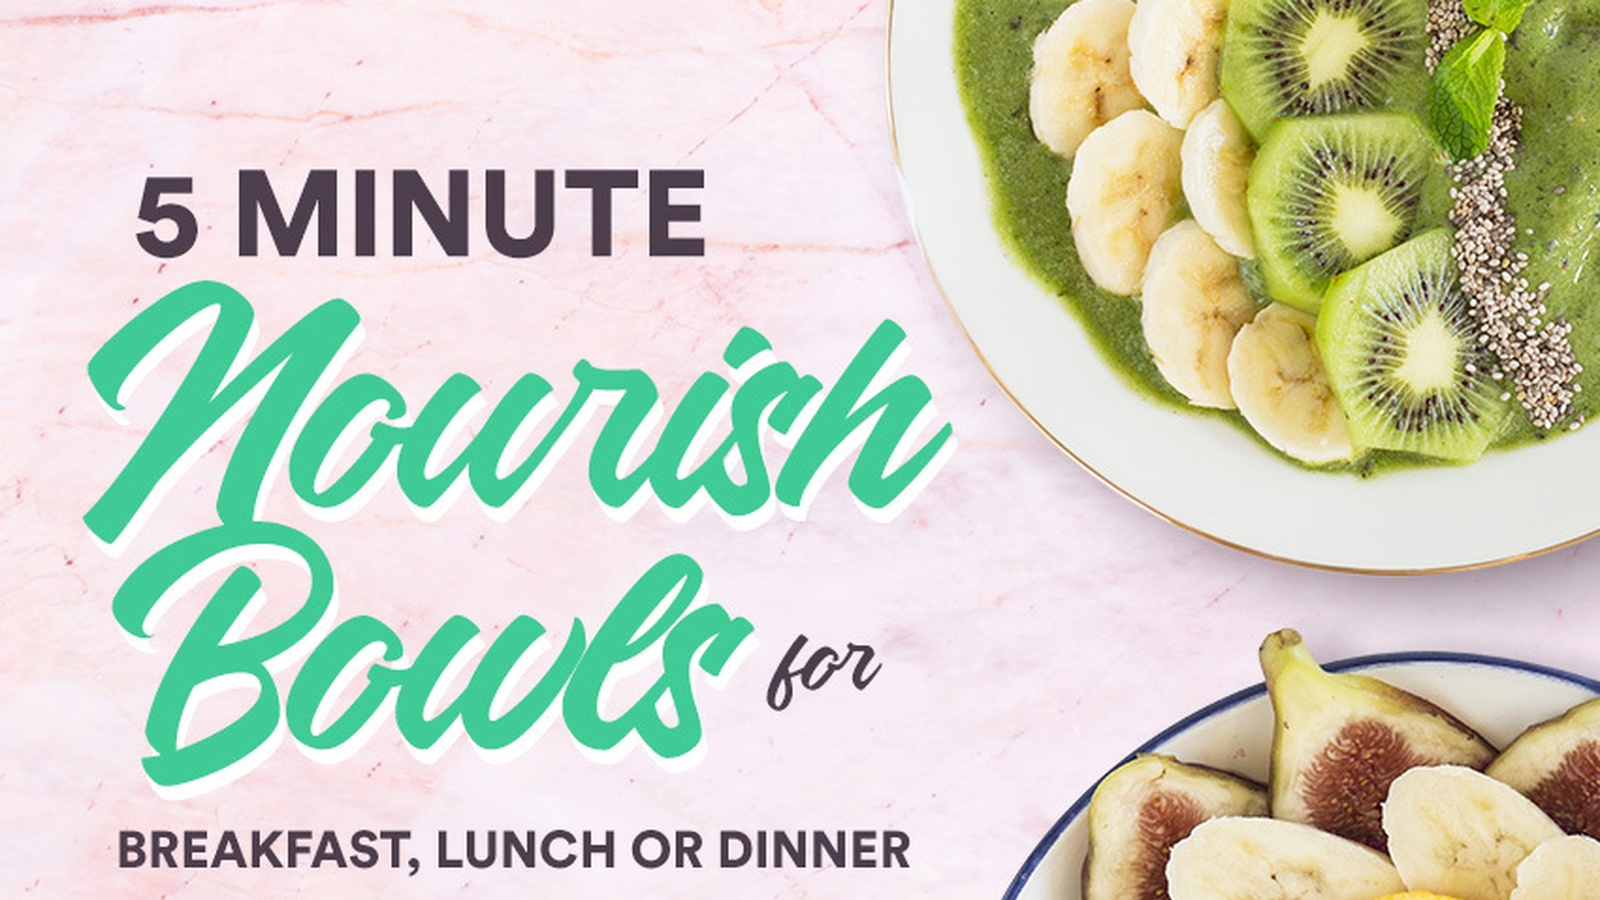 5 Minute Nourish Bowls for Breakfast, Lunch or Dinner